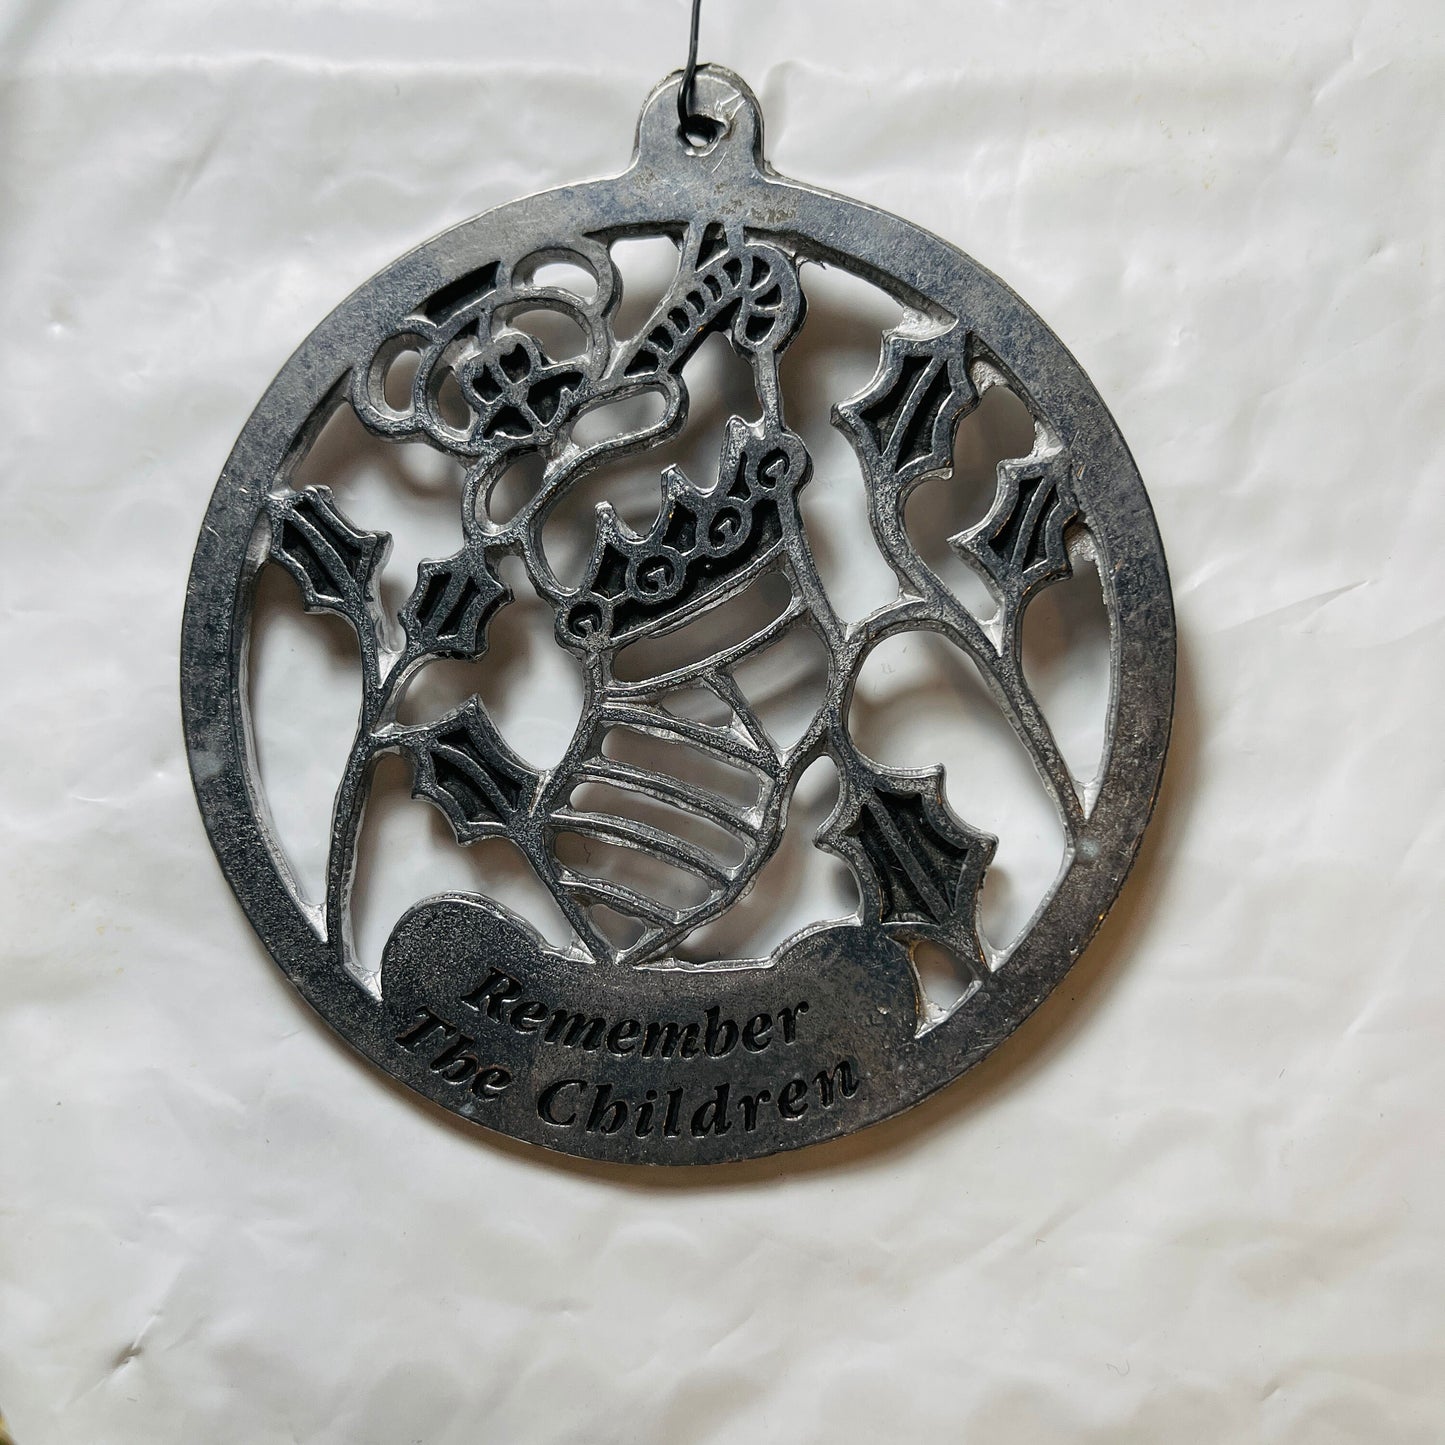 Pewter, Remember the Children, Merry Christmas, Dated 1983, Ornament